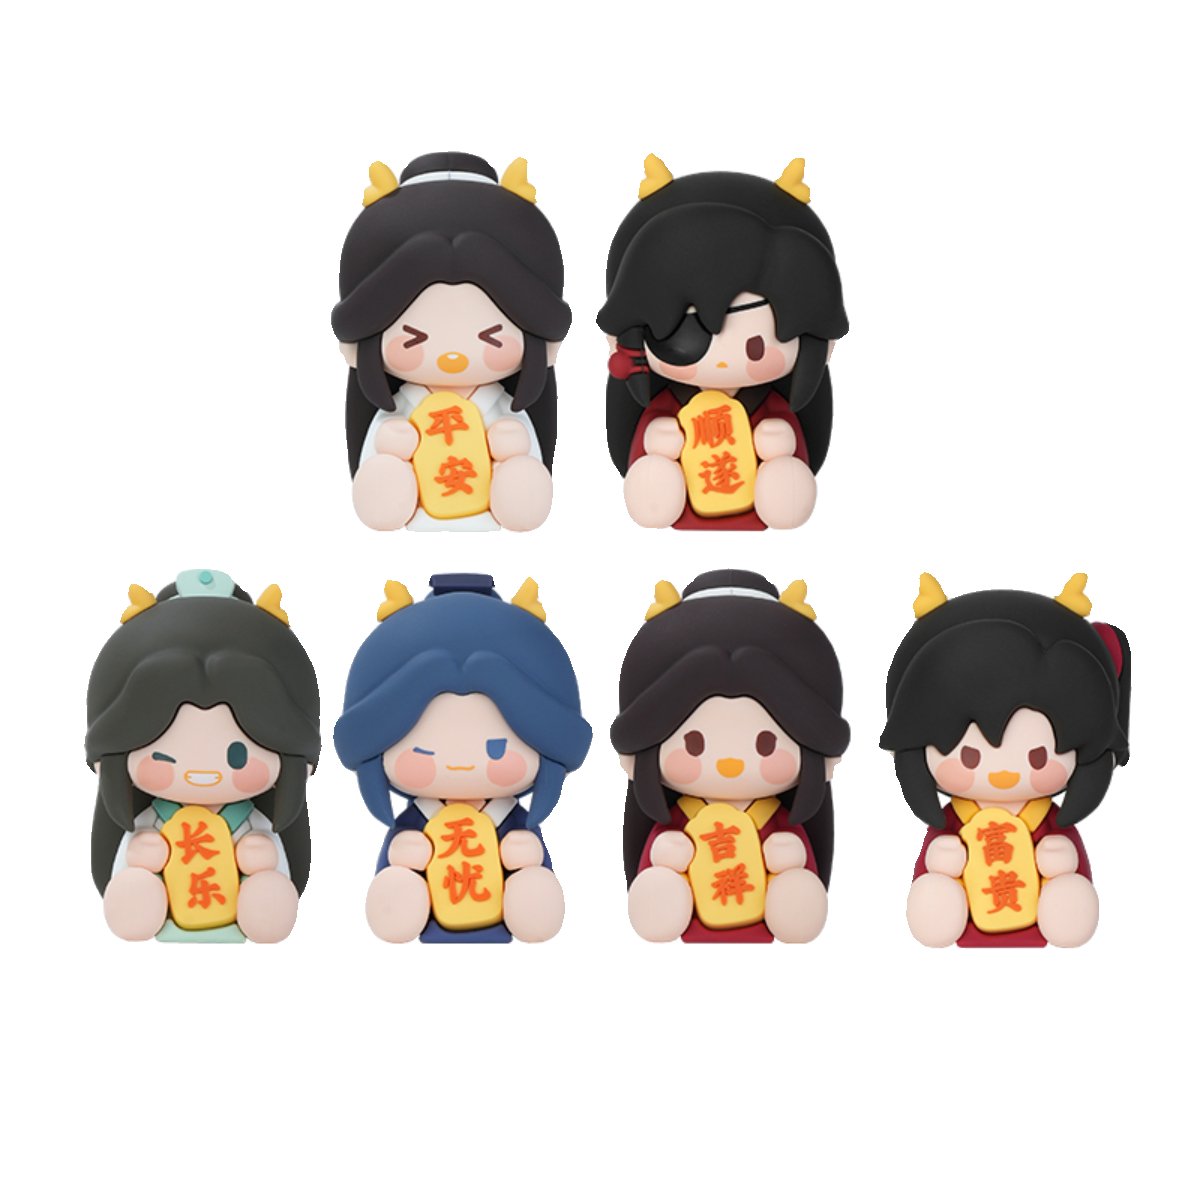 Heaven Official's Blessing | Long He Xin Xi Series 8cm Doll Blind Box